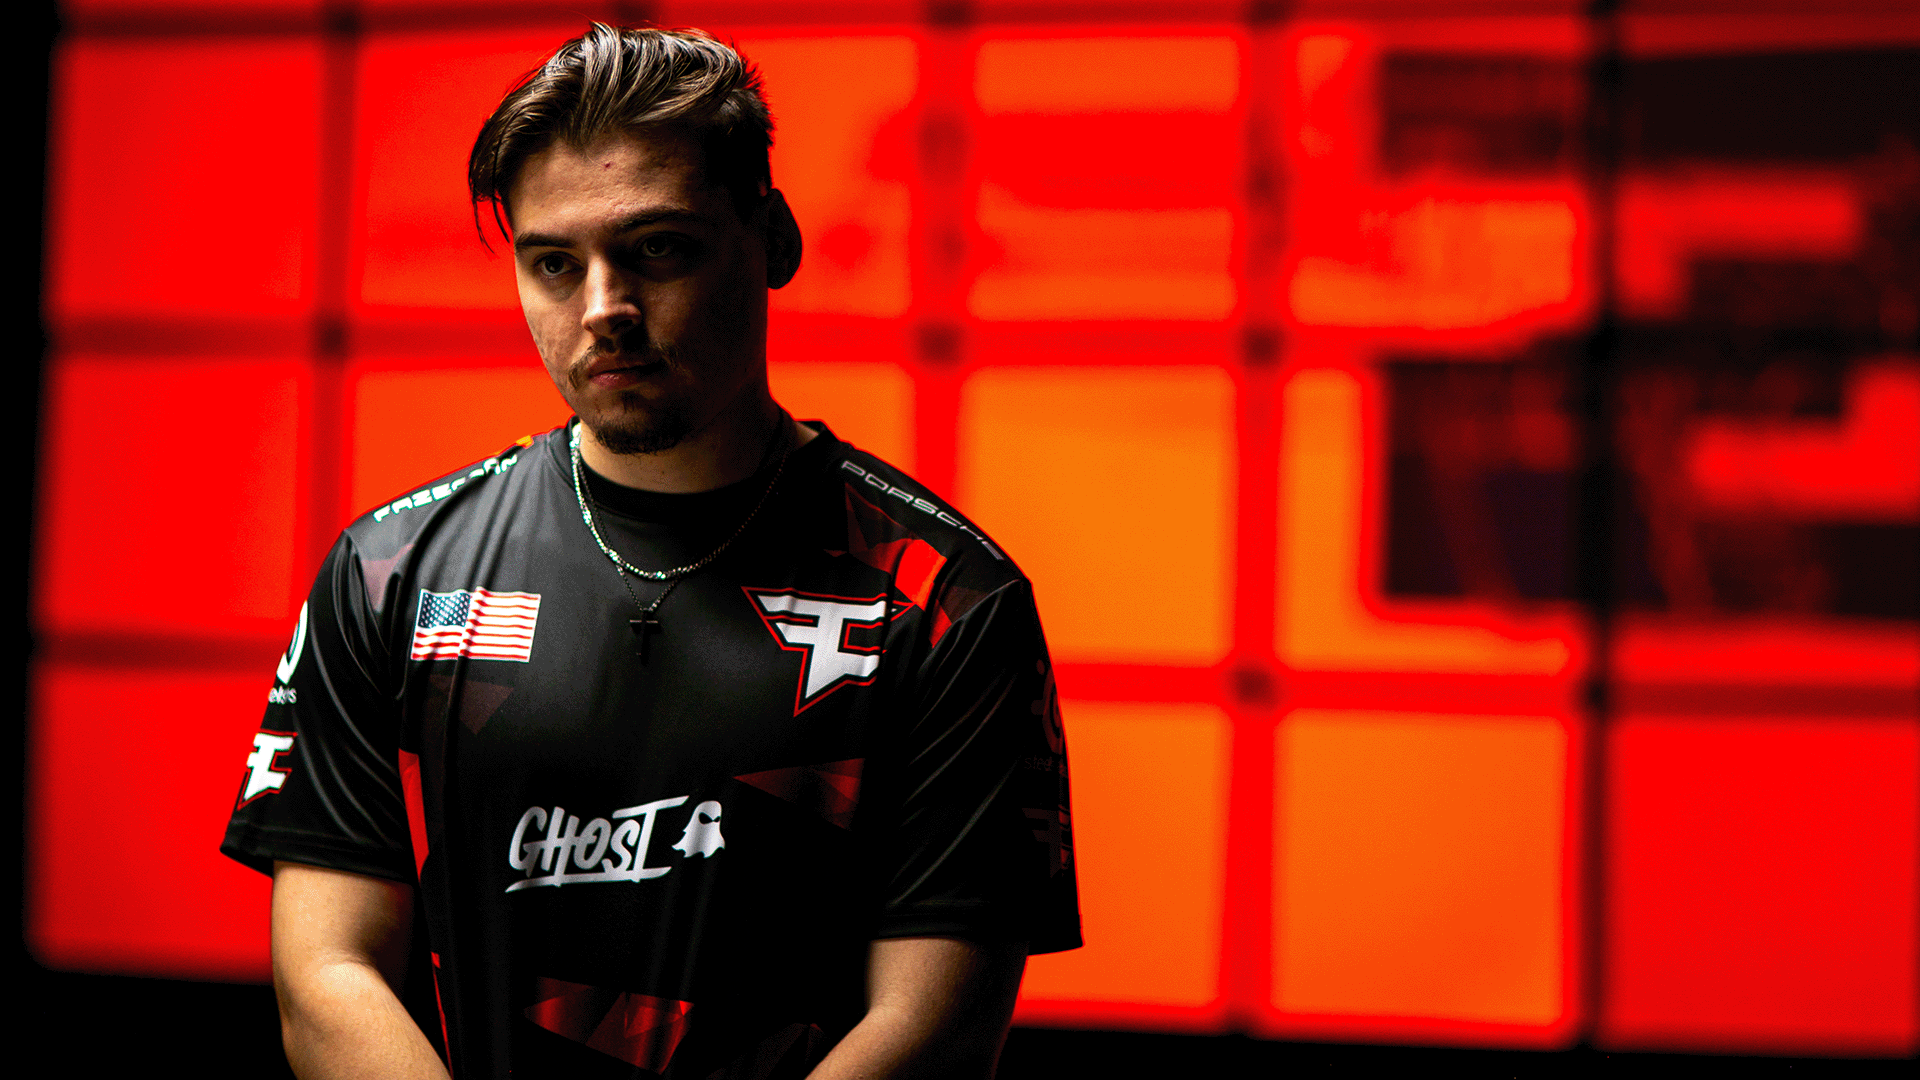 Renegade, from Faze Clan, poses in front of a red screen while wearing a Faze Clan jersey.